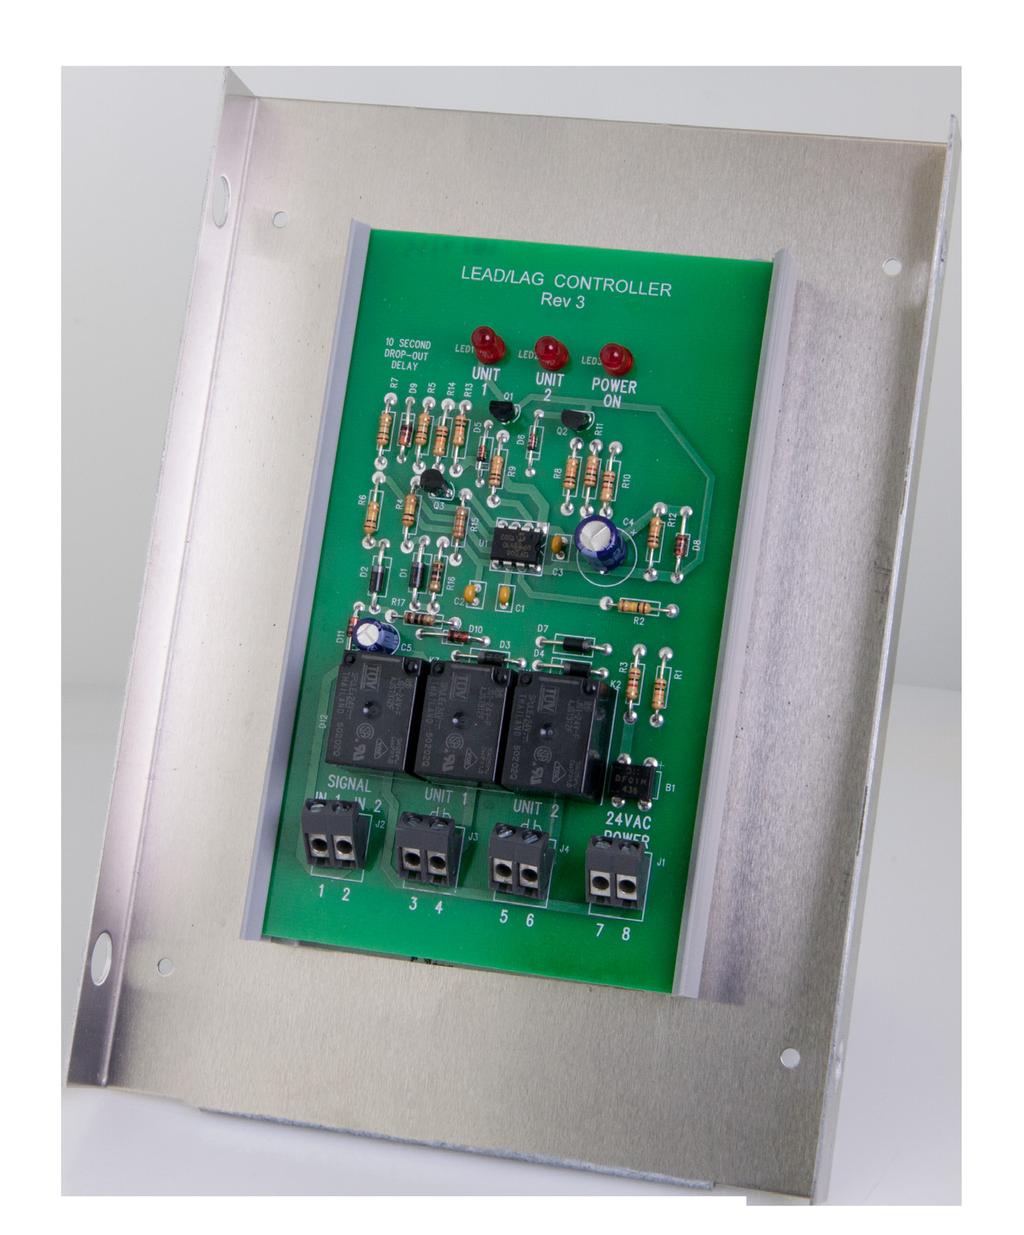 io-ll Lead/Lag ontroller This versatile 24 volt Lead/Lag ontroller offers balanced operating time between 2 redundant devices. The io-ll is microprocessor controlled.